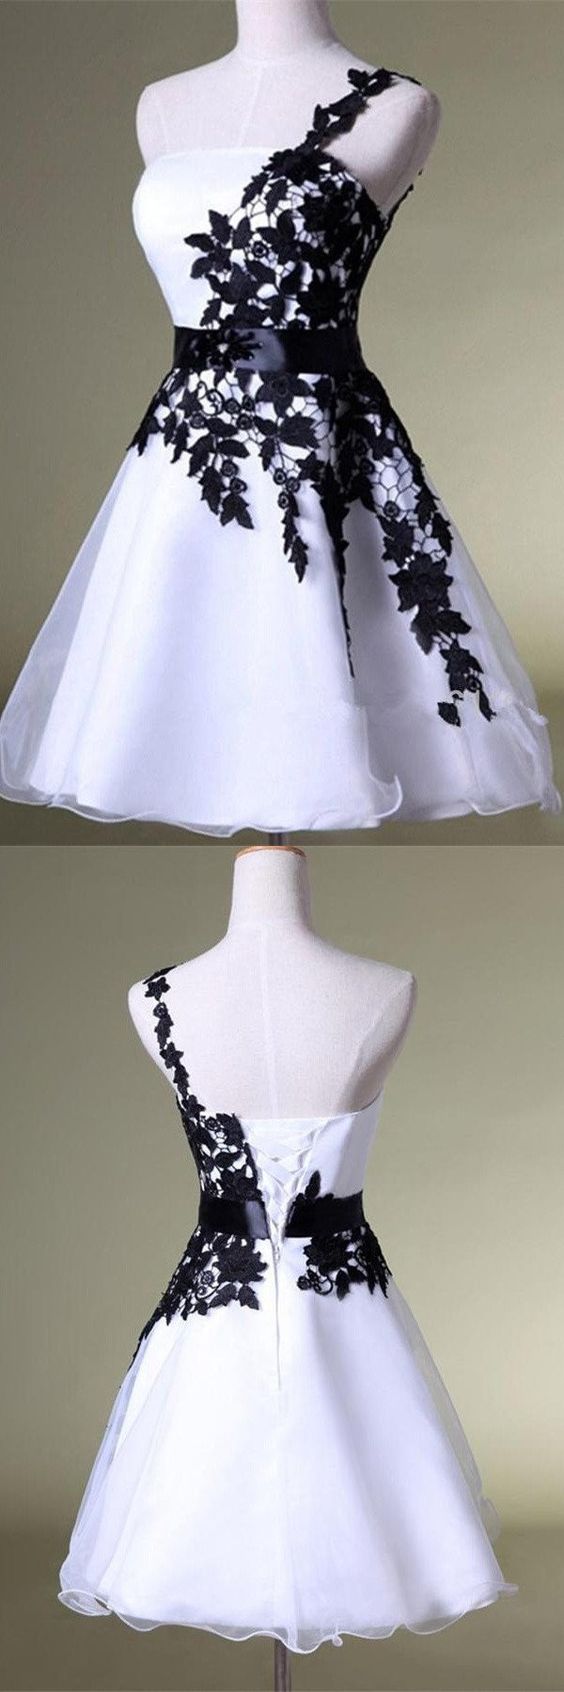 White&black, One Shoulder ,homecoming Dress, Lace, Short Prom Dress ,puffy Dress ,party Dress, Prom Dress , Prom Dress,evening Dress